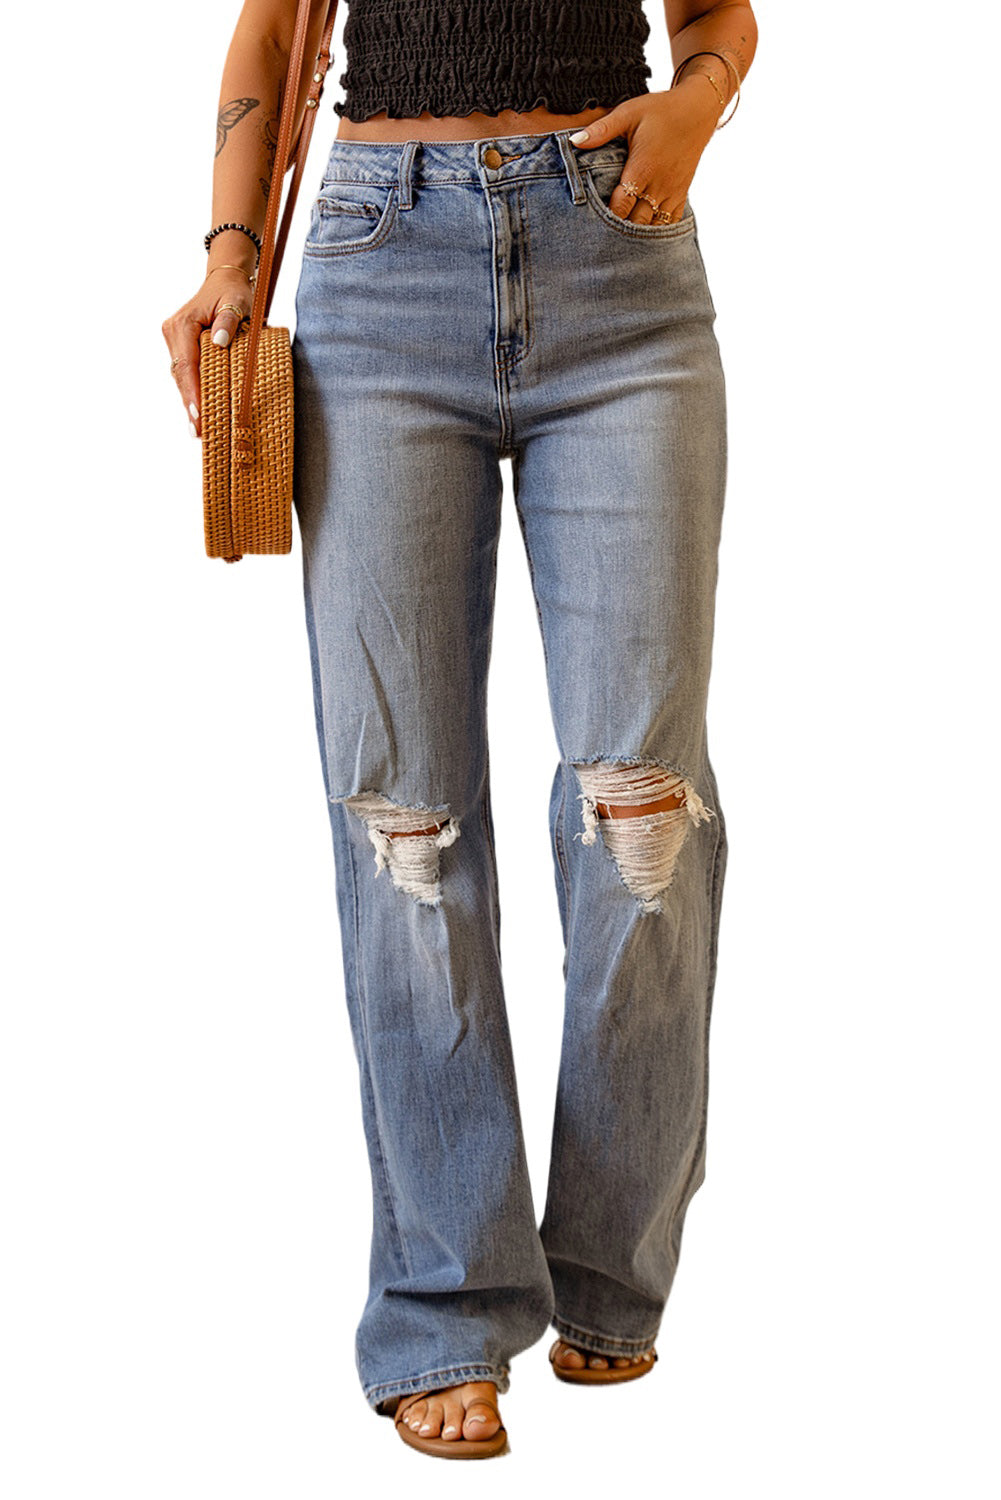 Sky Blue Distressed Ripped Knee Straight High Waist Jeans Jeans JT's Designer Fashion